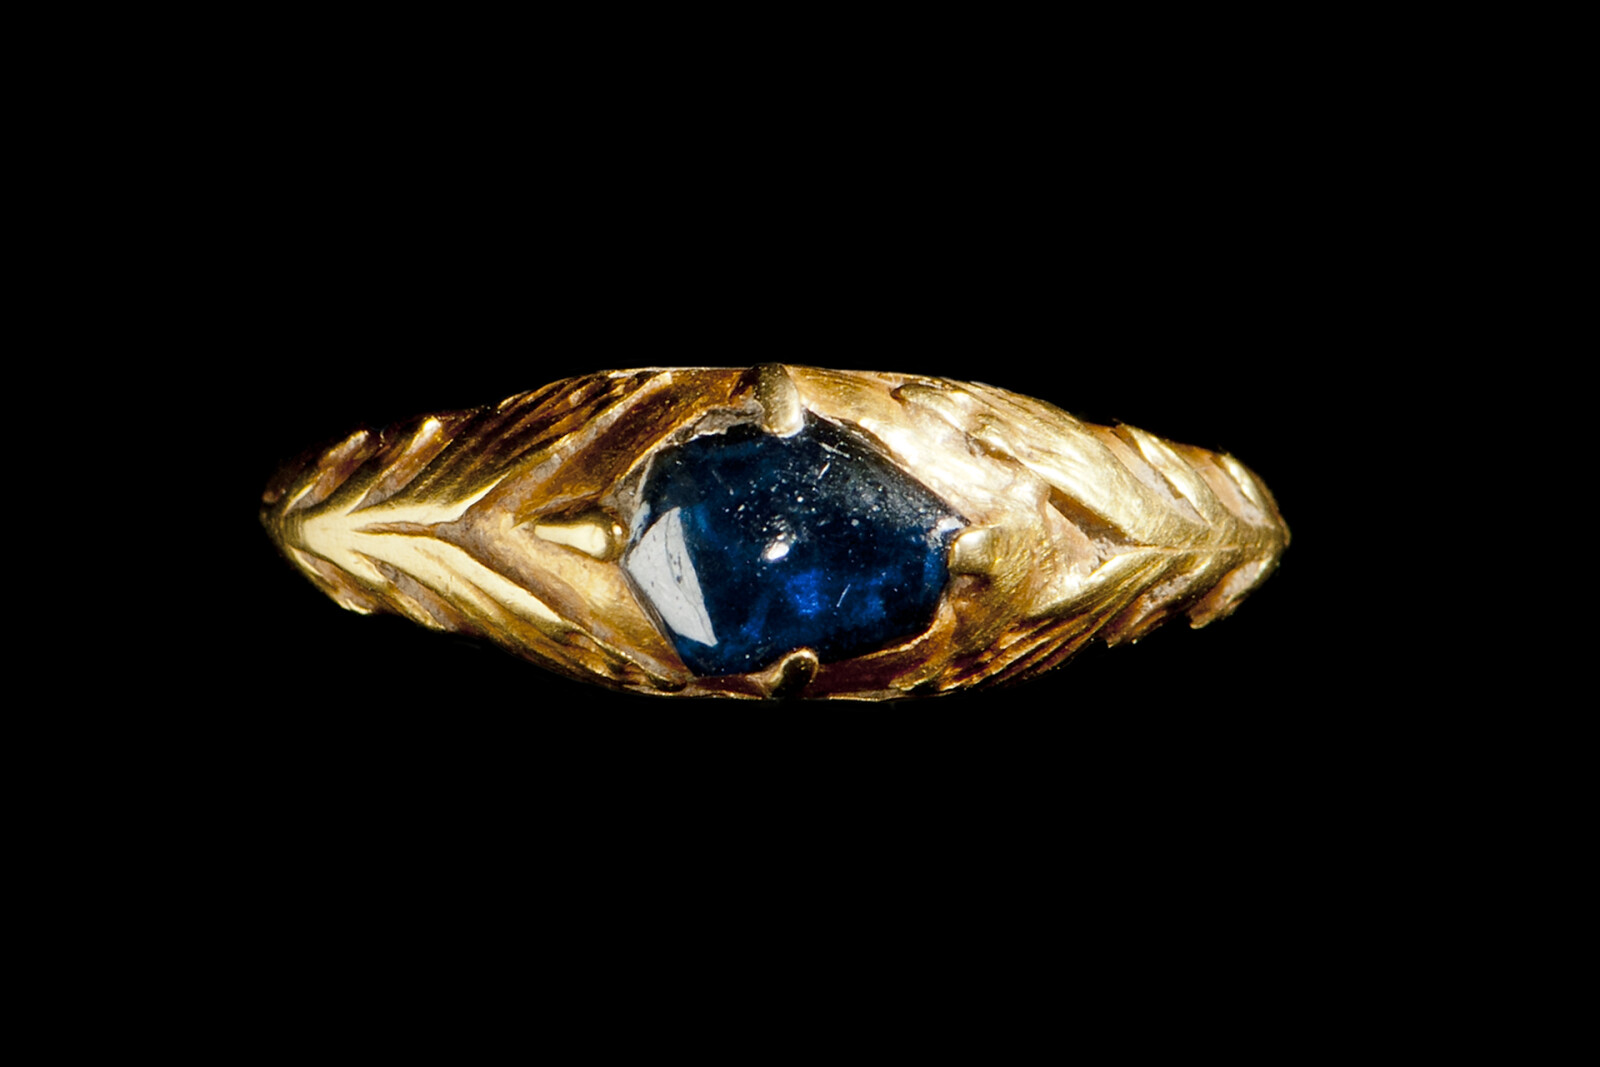 A picture of a 15th Century engraved gold and single cabochon sapphire ring